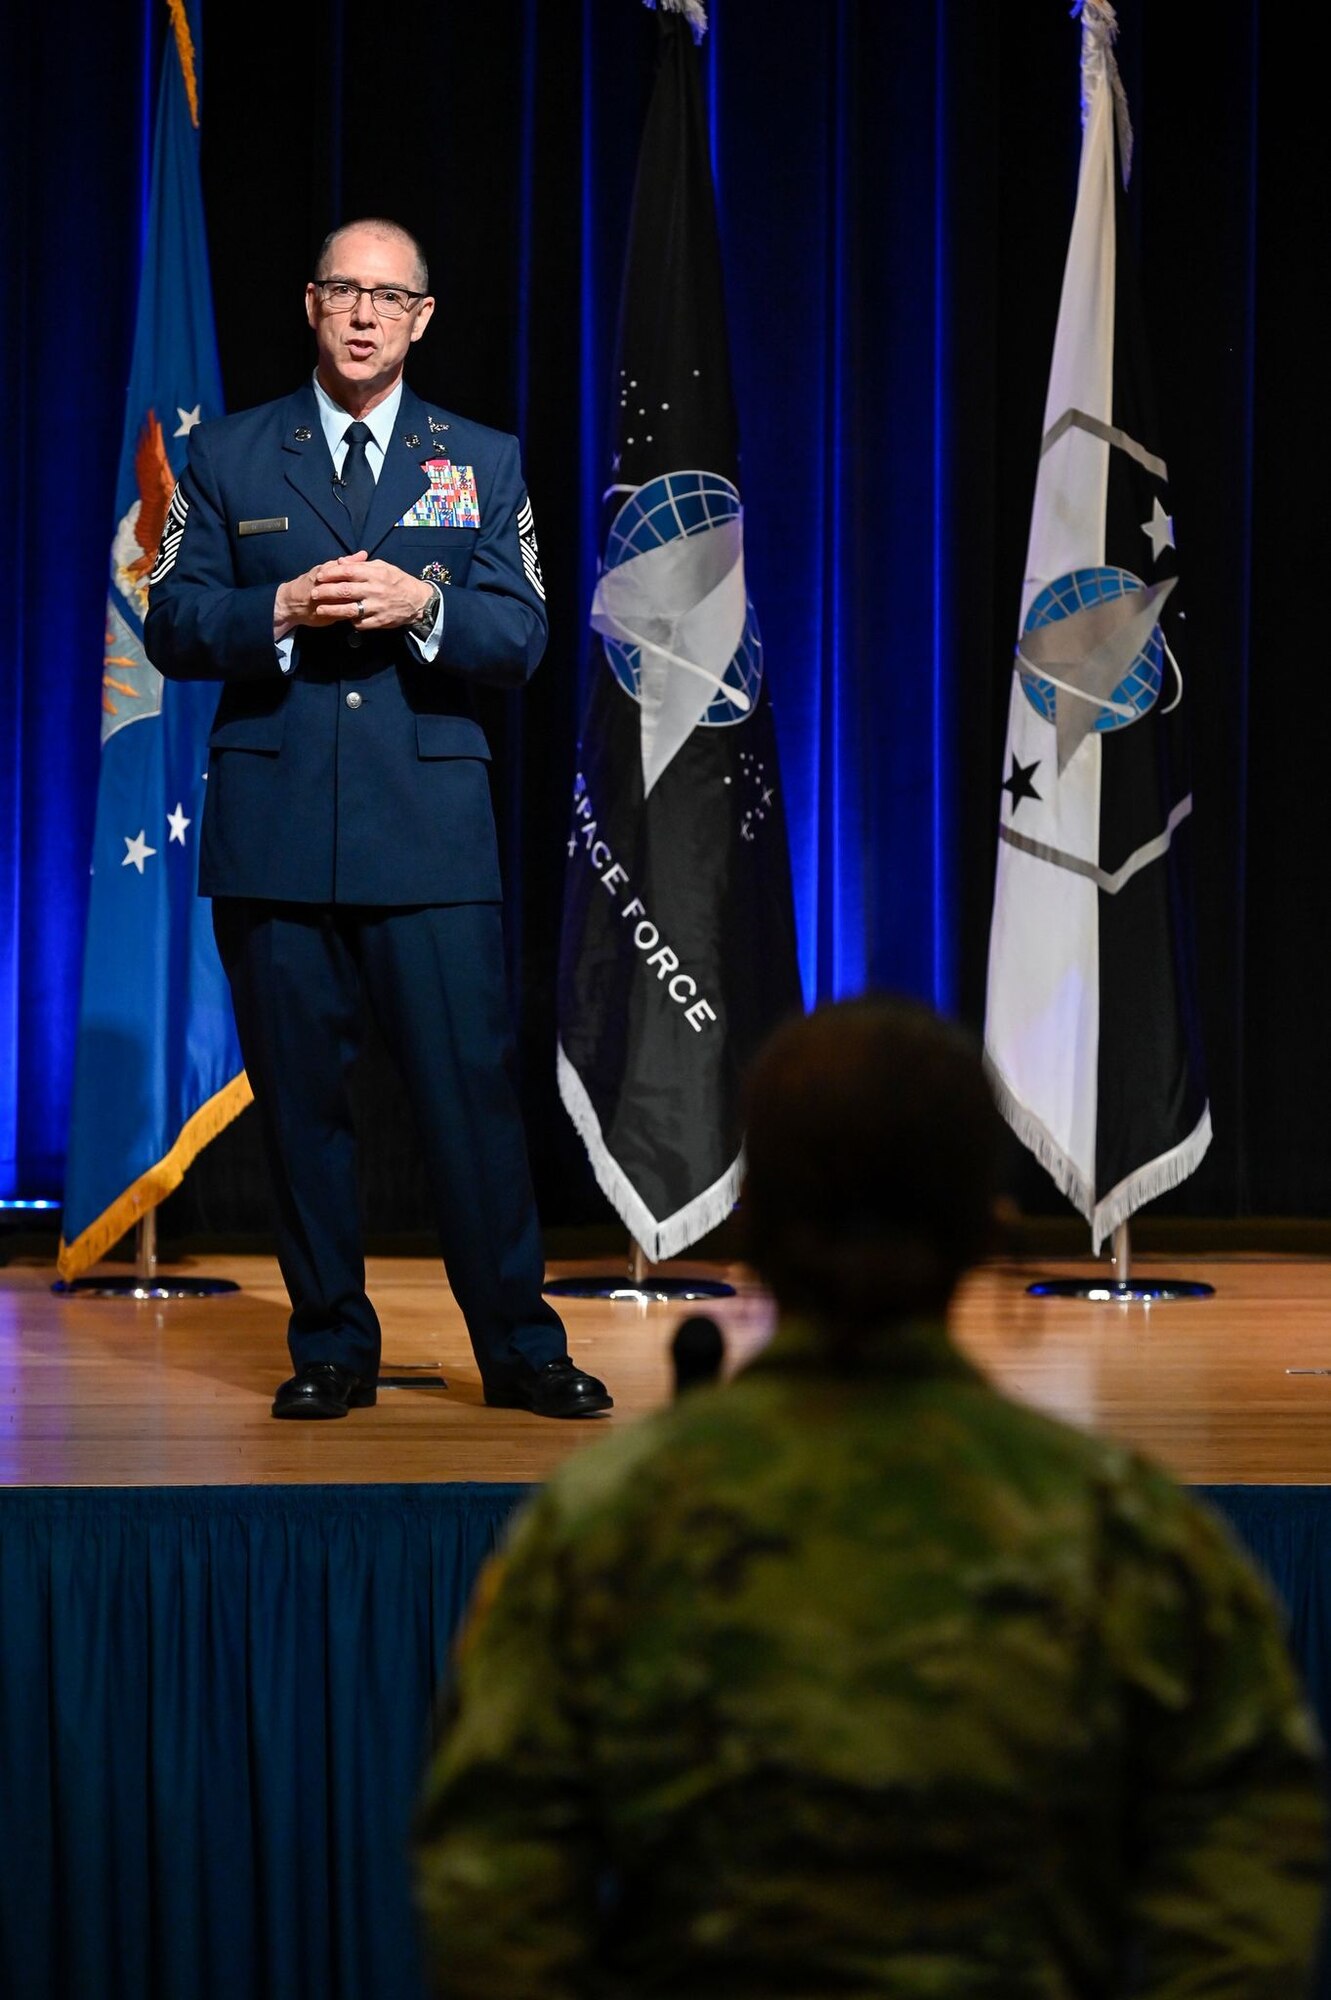 Chief Master Sgt. Roger A. Towberman, senior enlisted advisor of U. S. Space Force, delivers remarks after a ceremony at the Pentagon transferring airmen into the Space Force, Arlington, Va., Sept. 15, 2020. About 300 airmen at bases worldwide, including 22 in the audience, transferred during the ceremony.